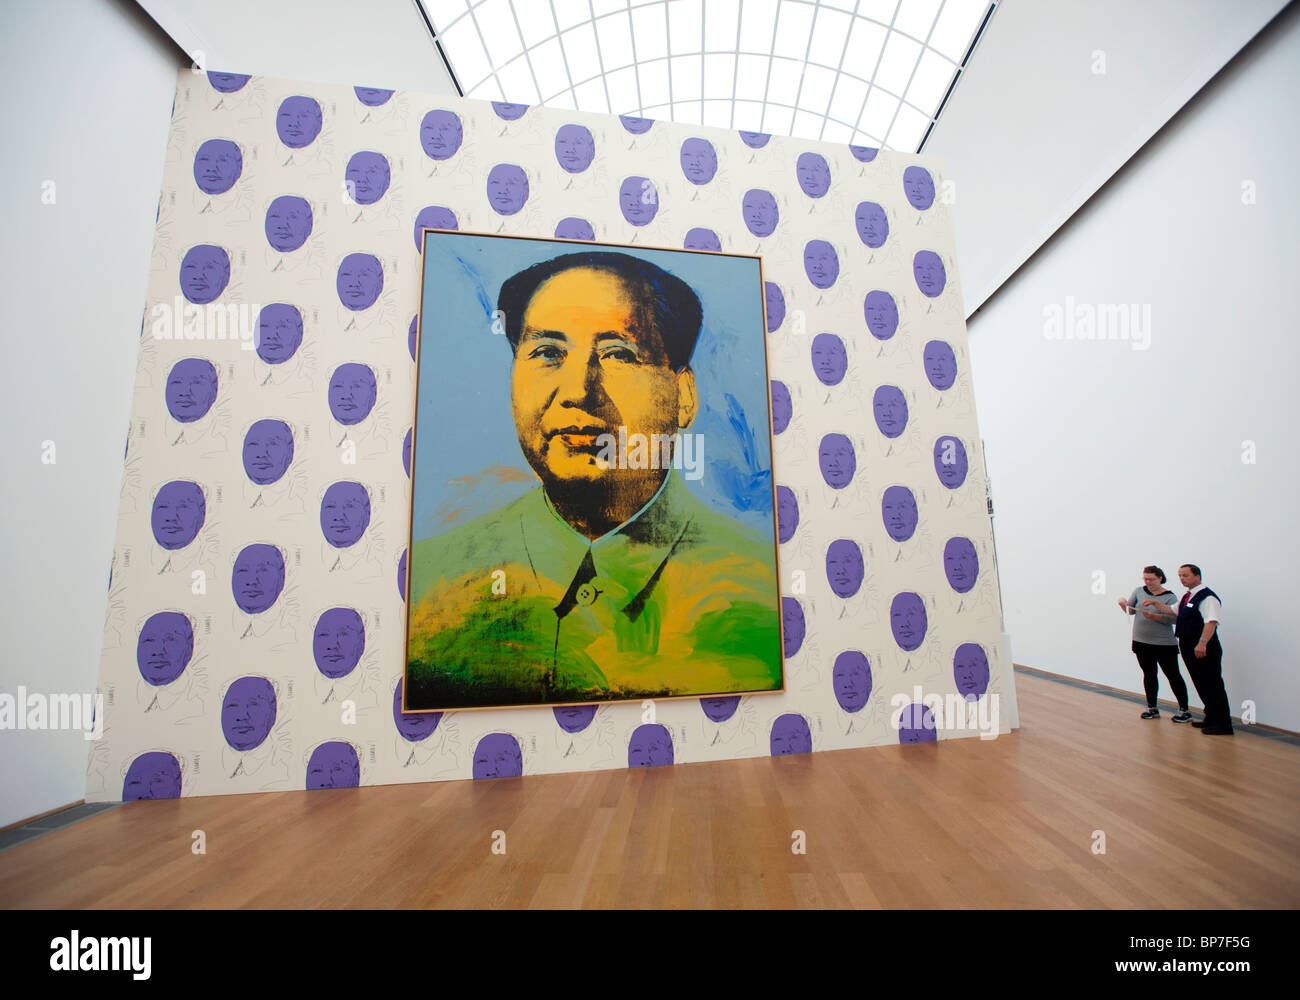 Painting of Chairman Mao by Andy Warhol at Hamburger Bahnhof Museum of Contemporary Art in Berlin Germany Stock Photo